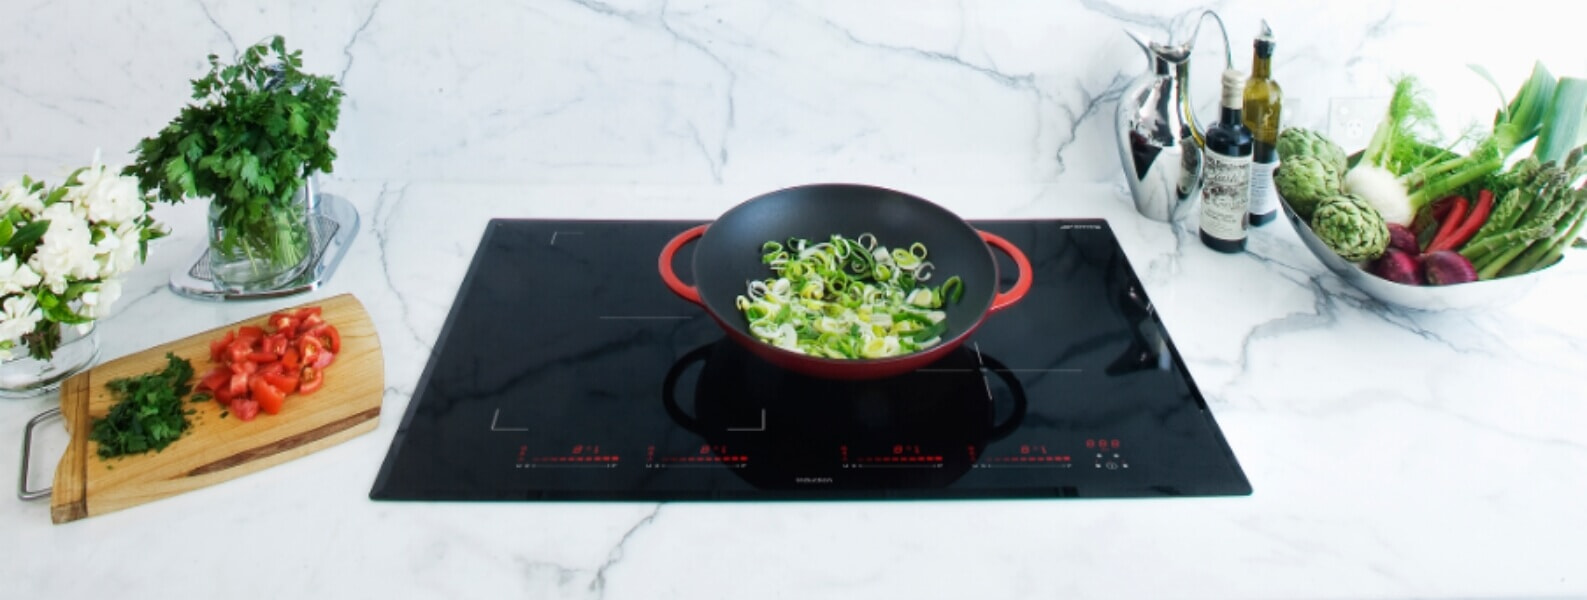 Spring onions are cooked on a Smeg ceramic cooktop